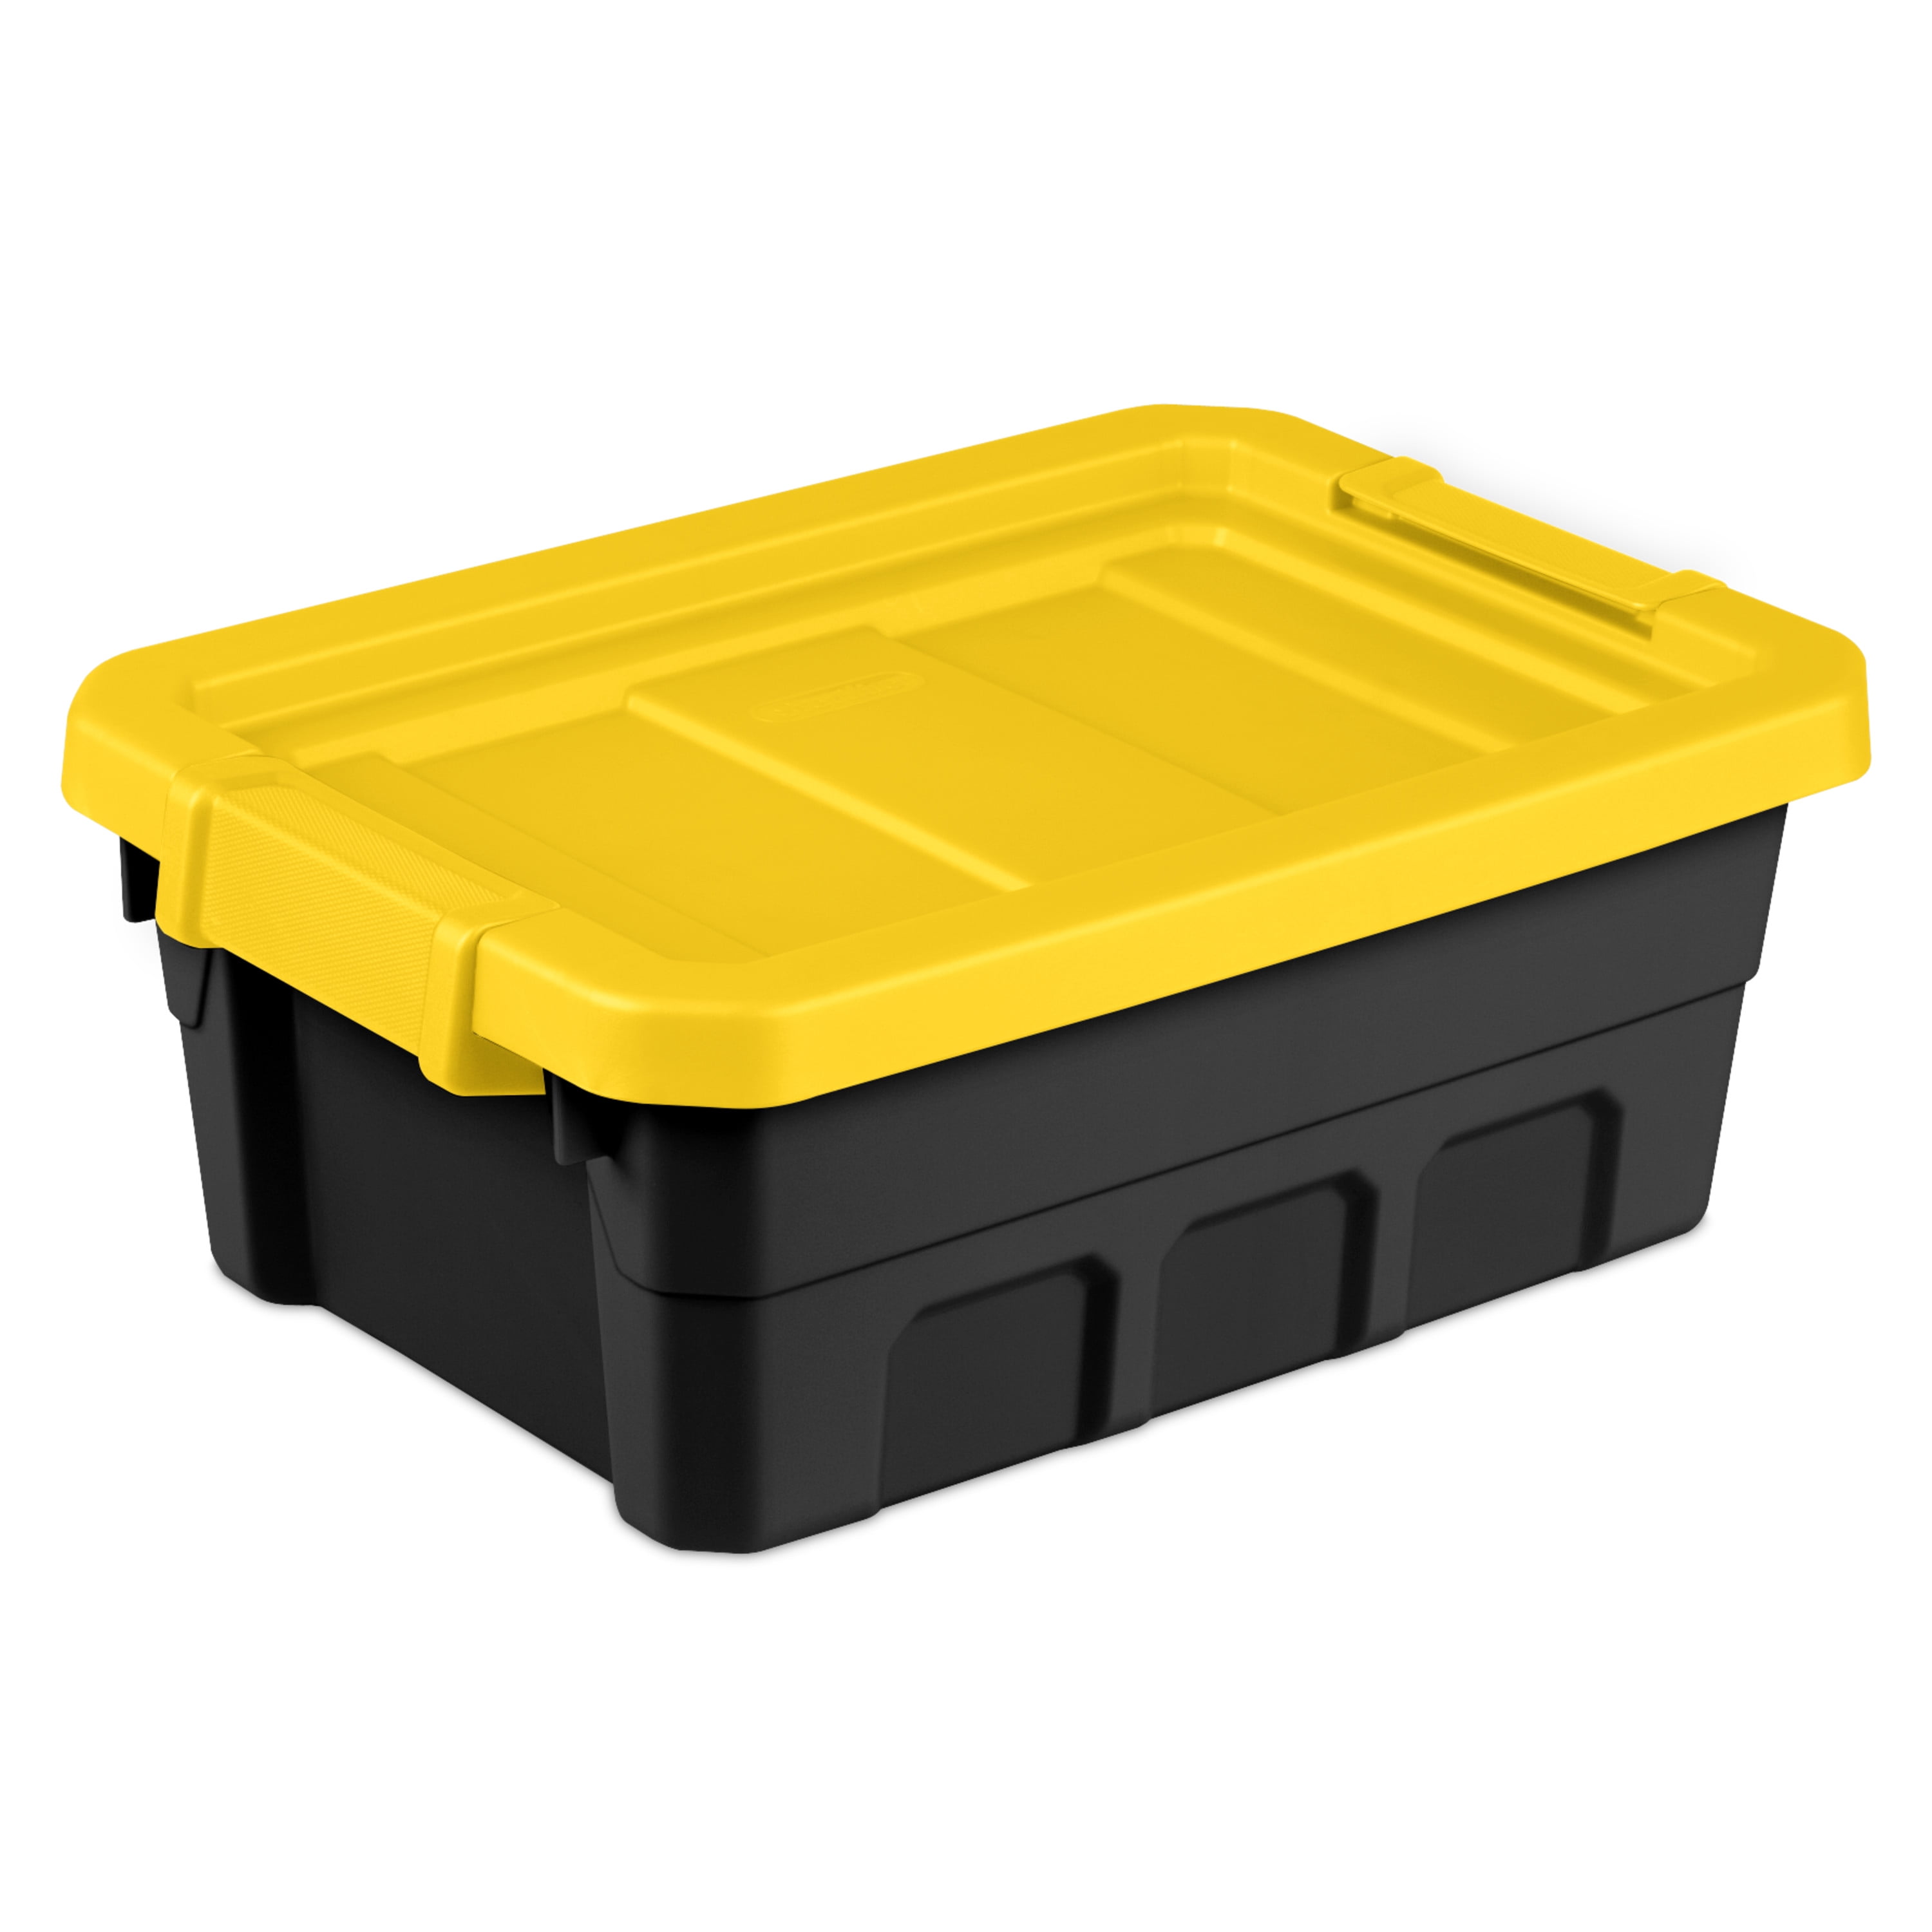 Sterilite 18319Y04 20 Gallon Heavy Duty Plastic Storage Container Box with  Lid and Latches, Yellow/Black (4 Pack)